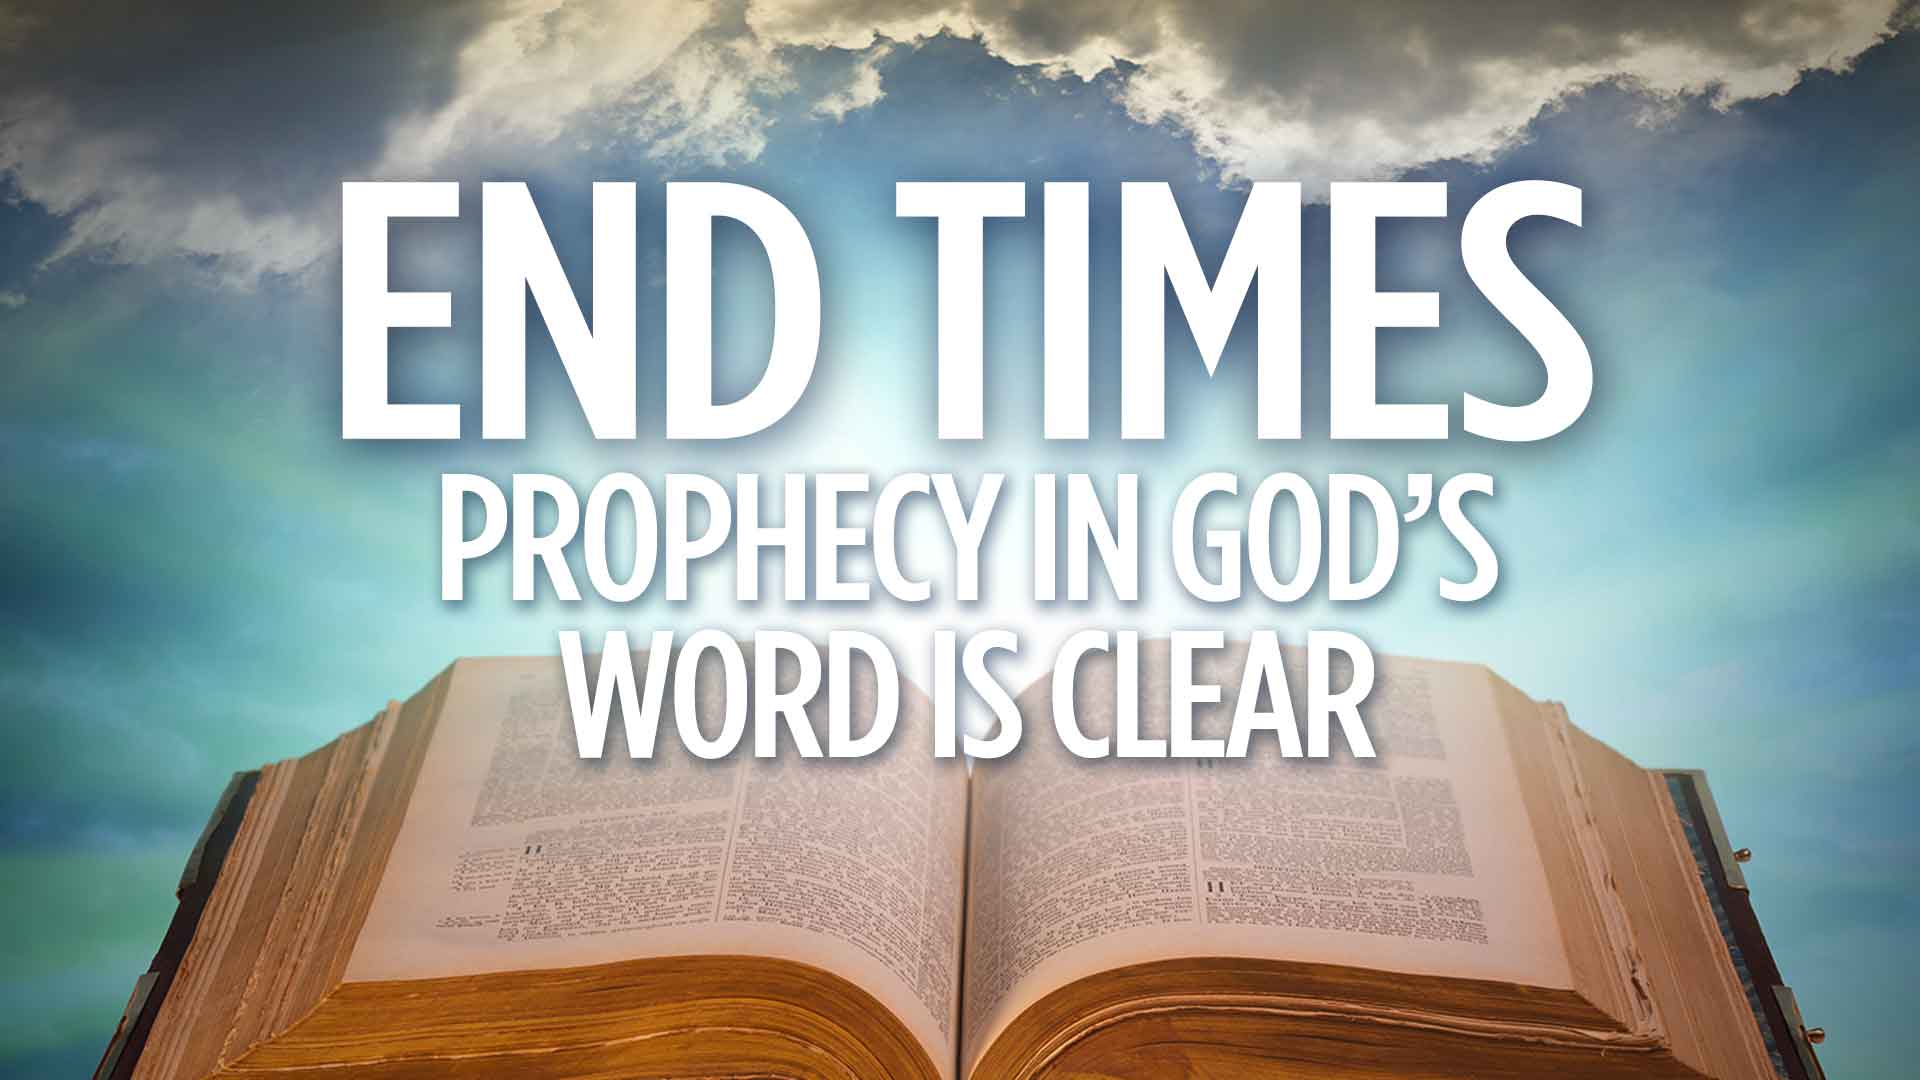 End Times Prophecy God 's Word is Clear 1920x1080